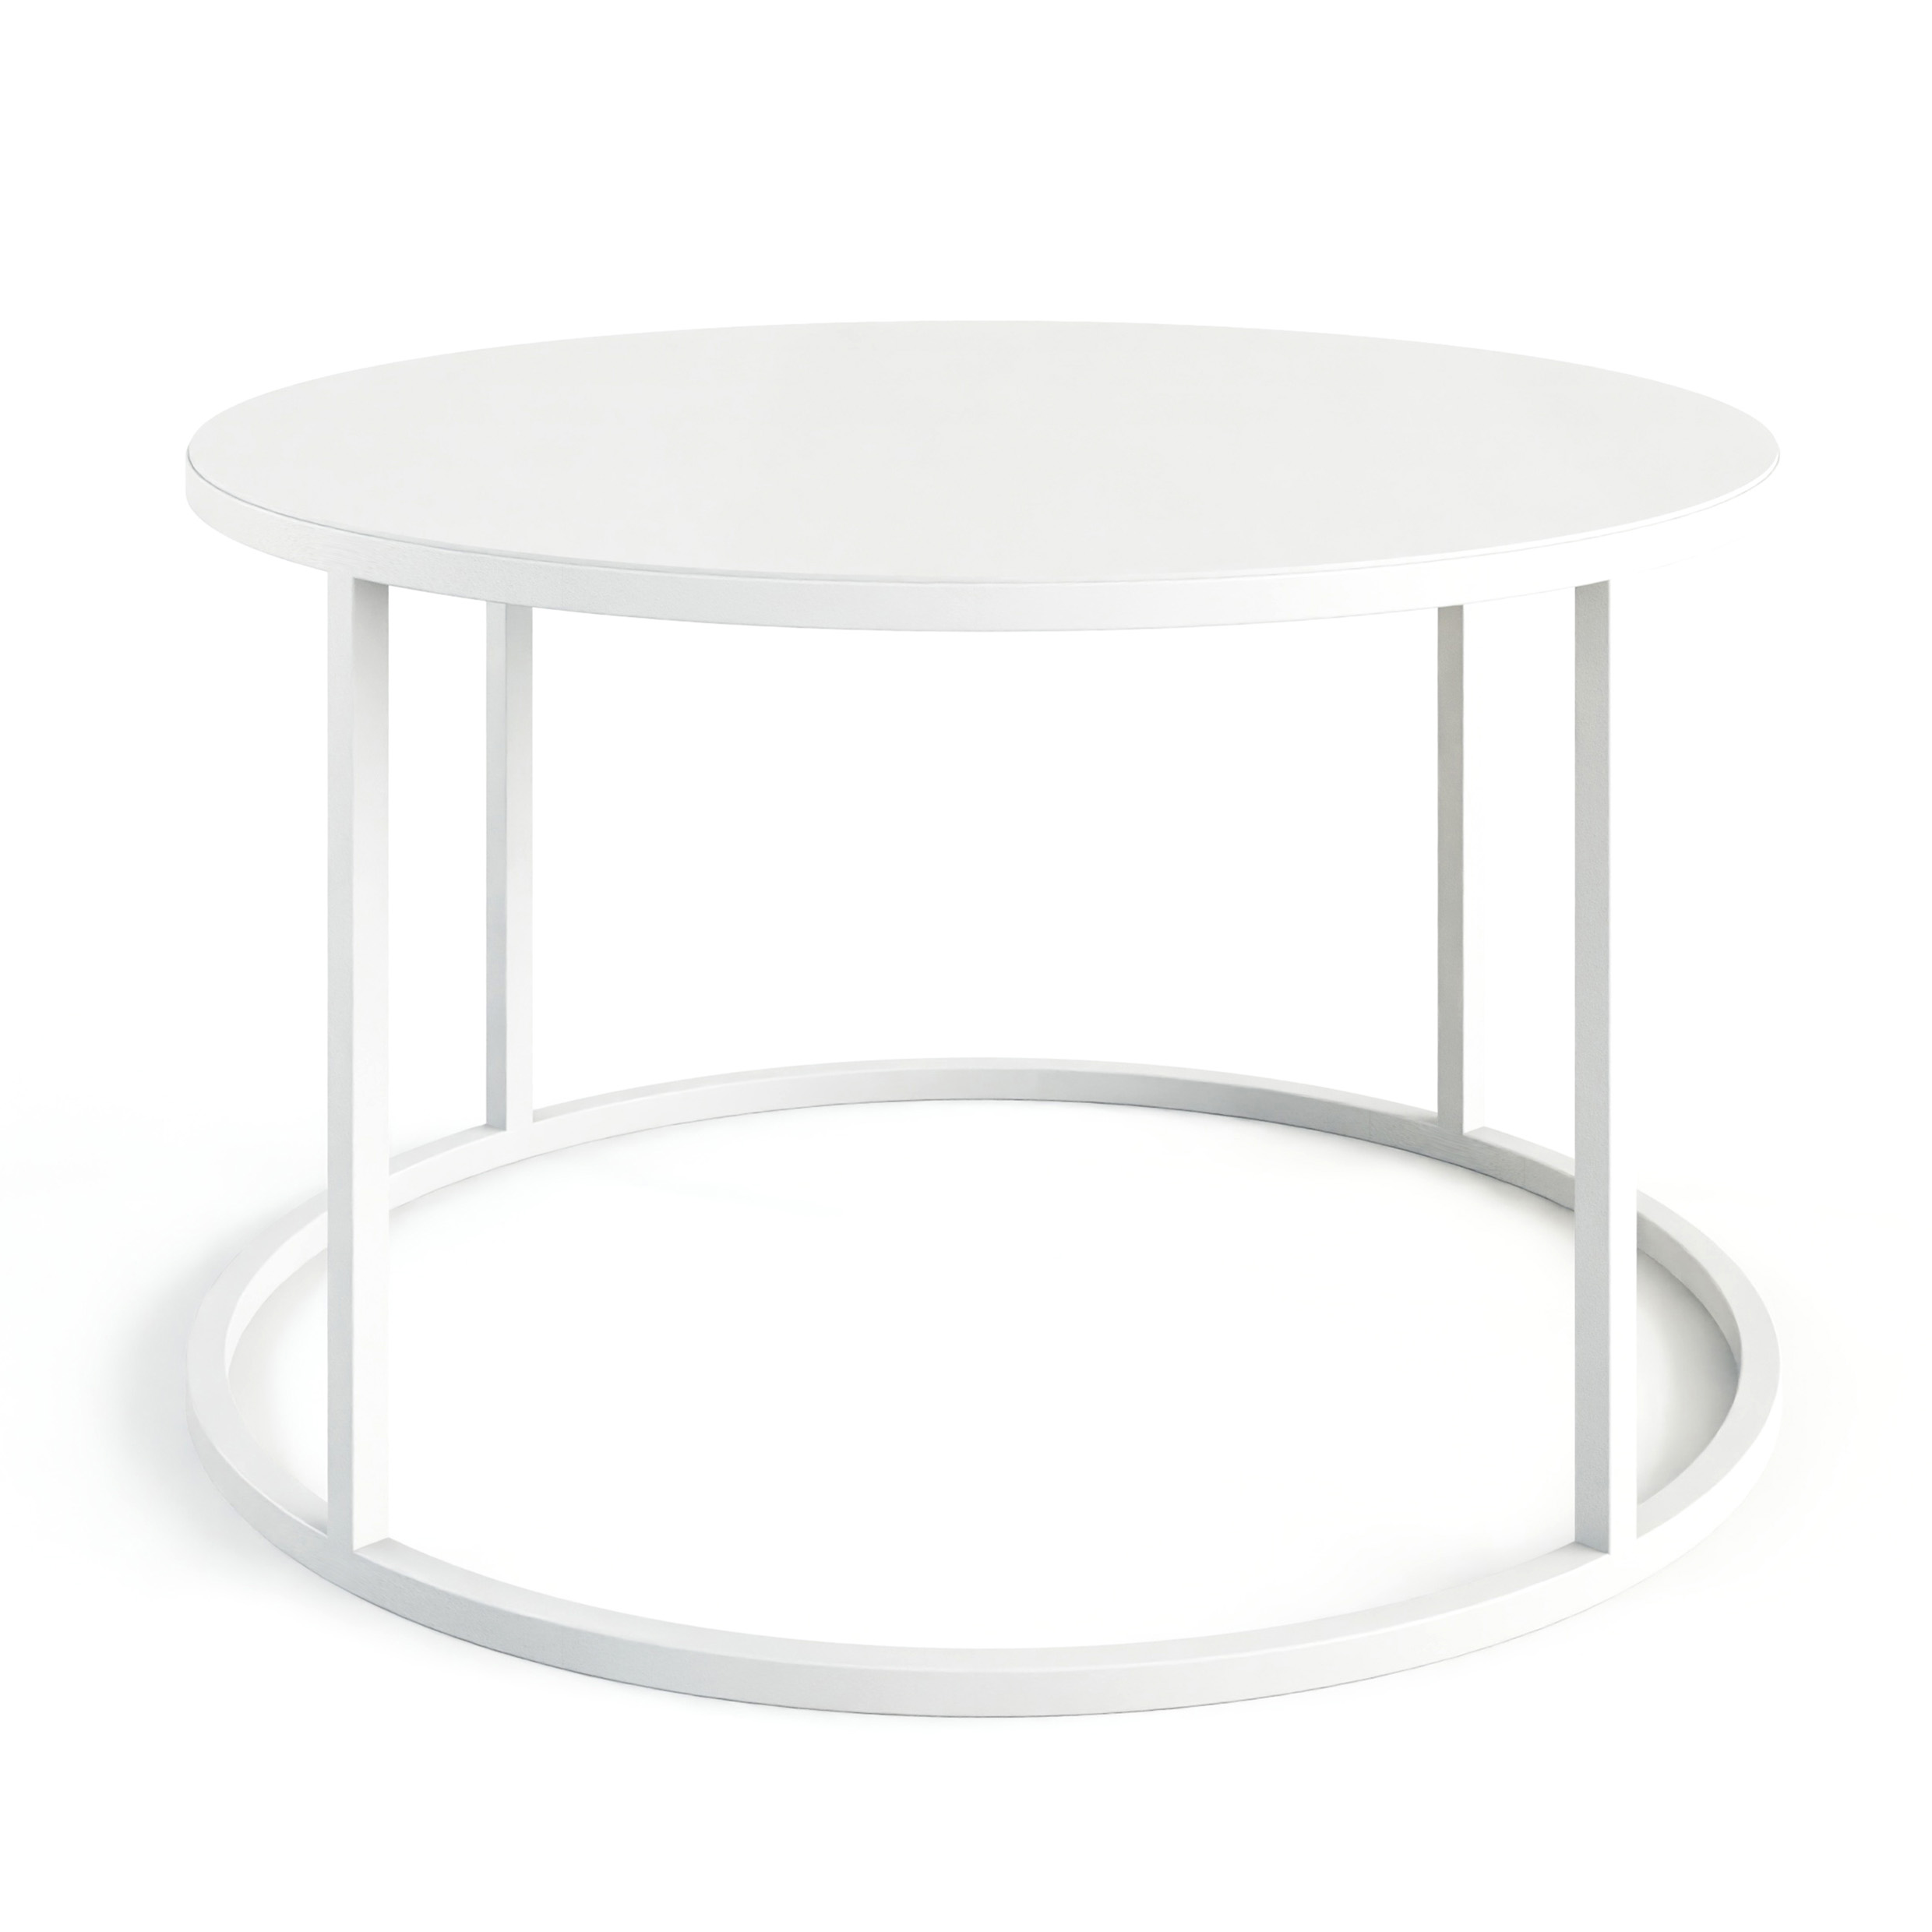 METALLBUDE // VESINA X - COUCH TABLE | WHITE